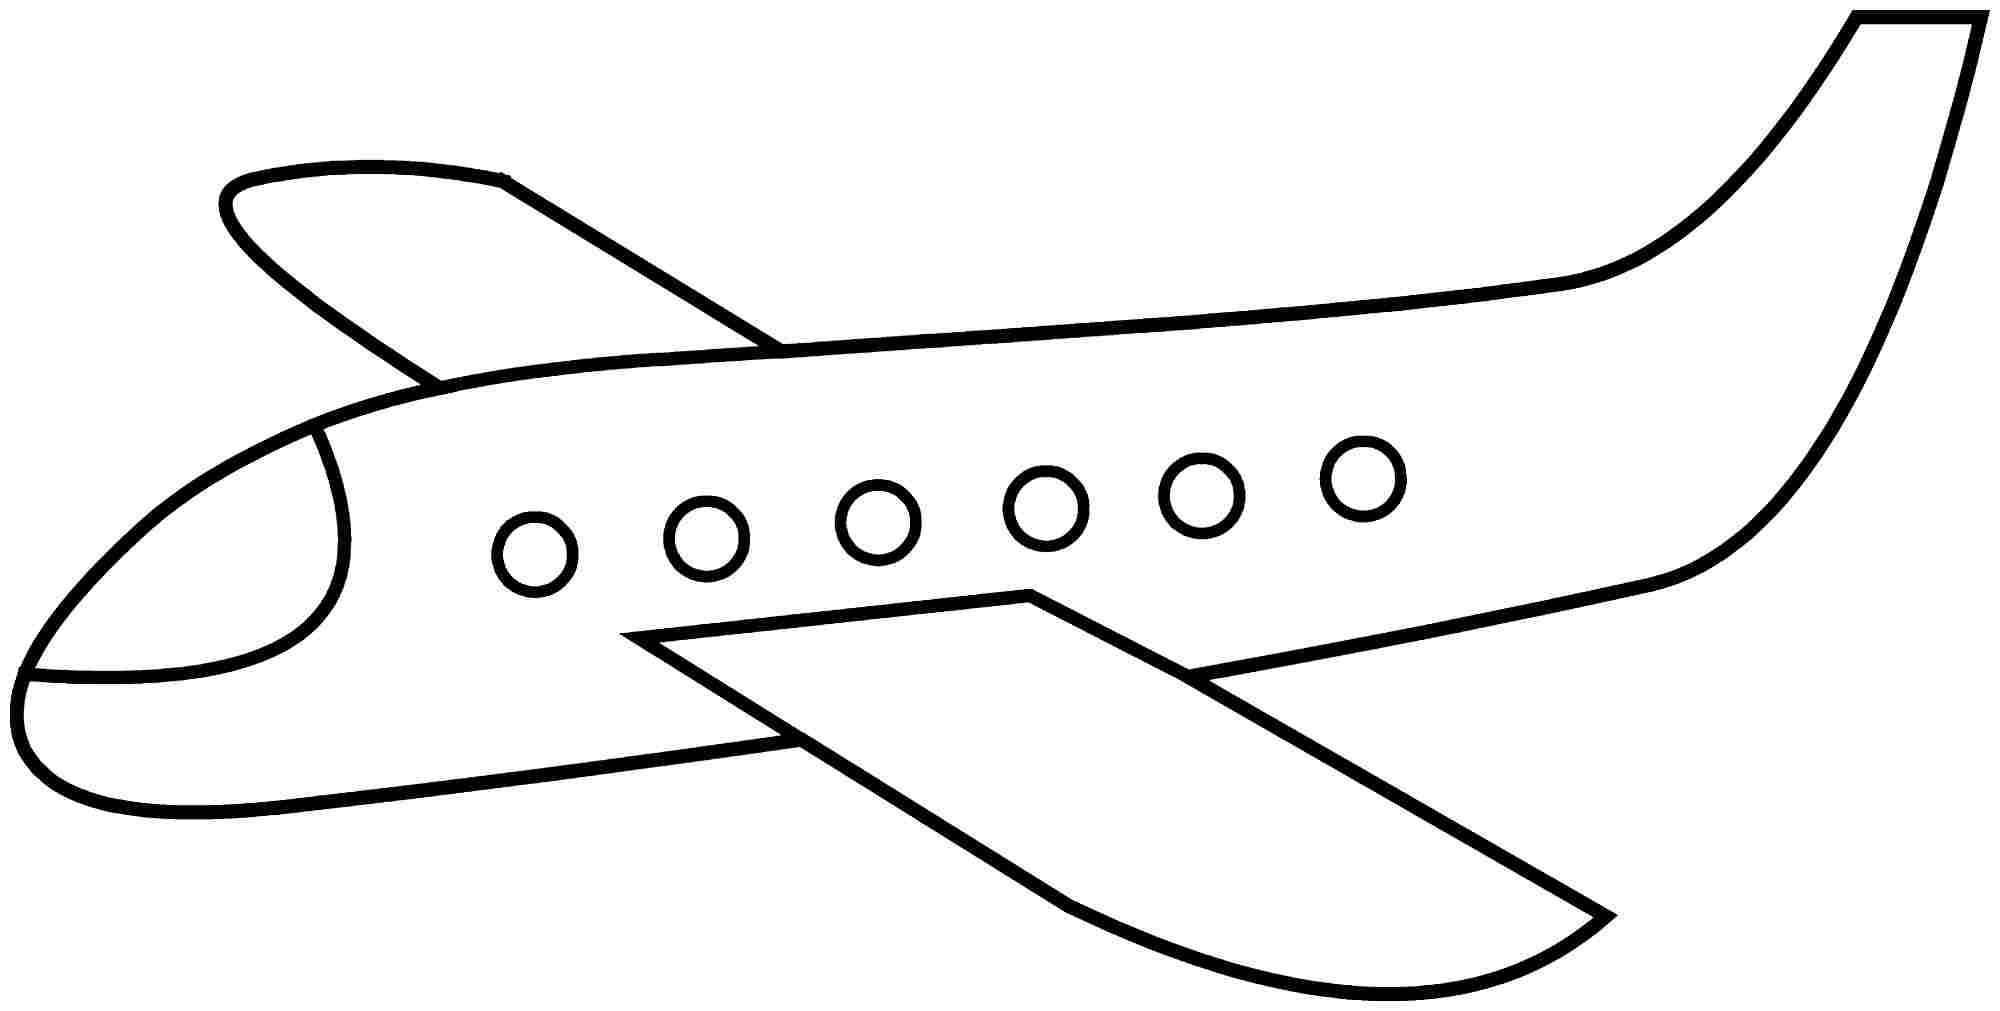 Airplane pages free printable. Biplane clipart coloring page